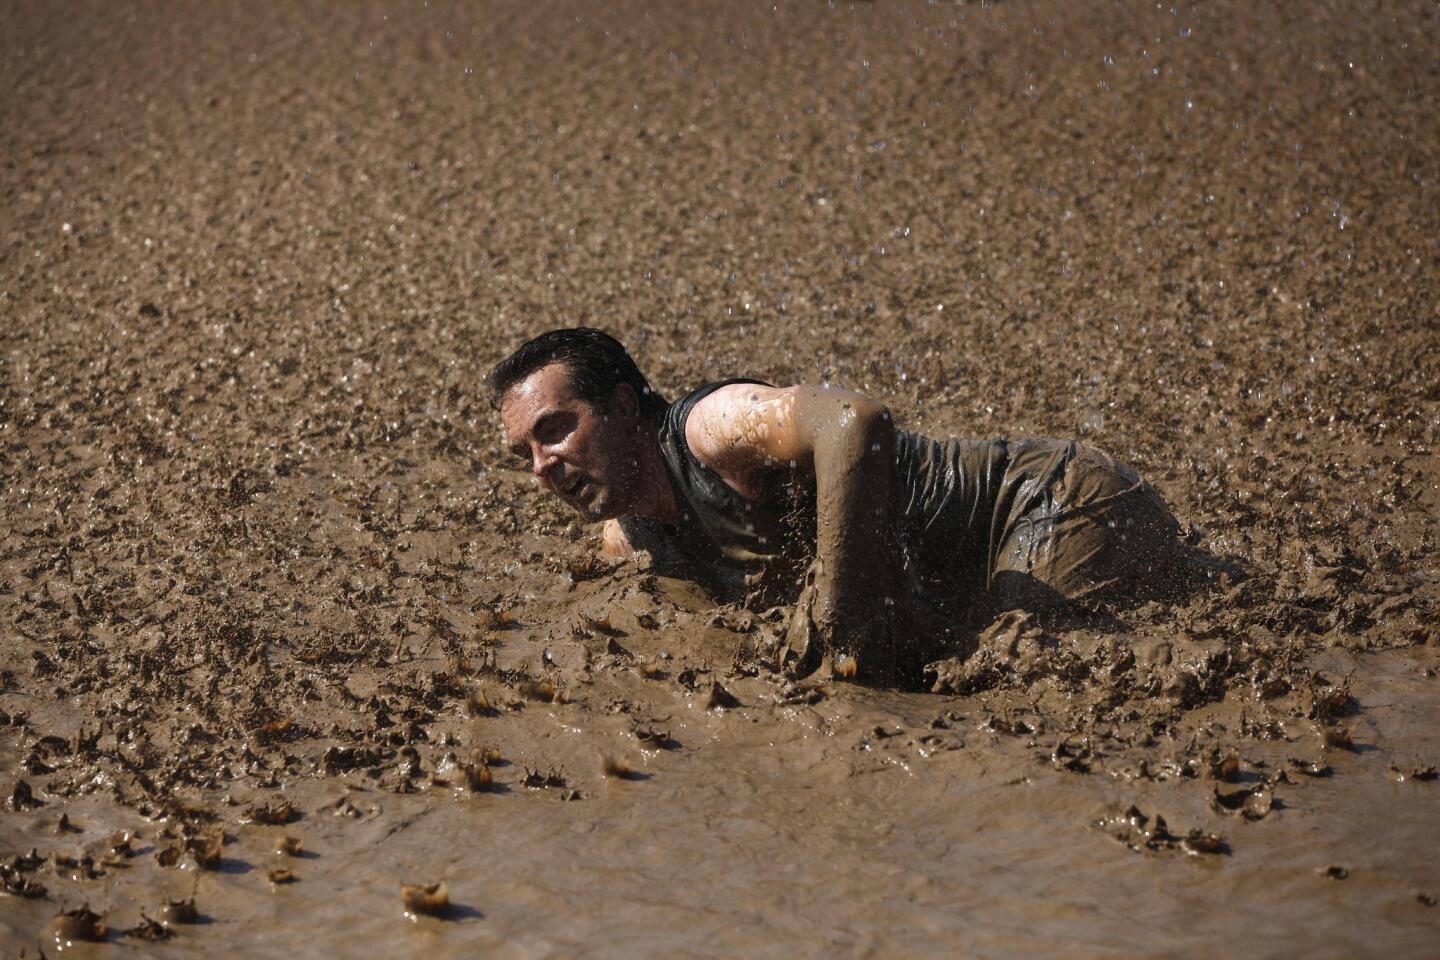 Stuck in the muck